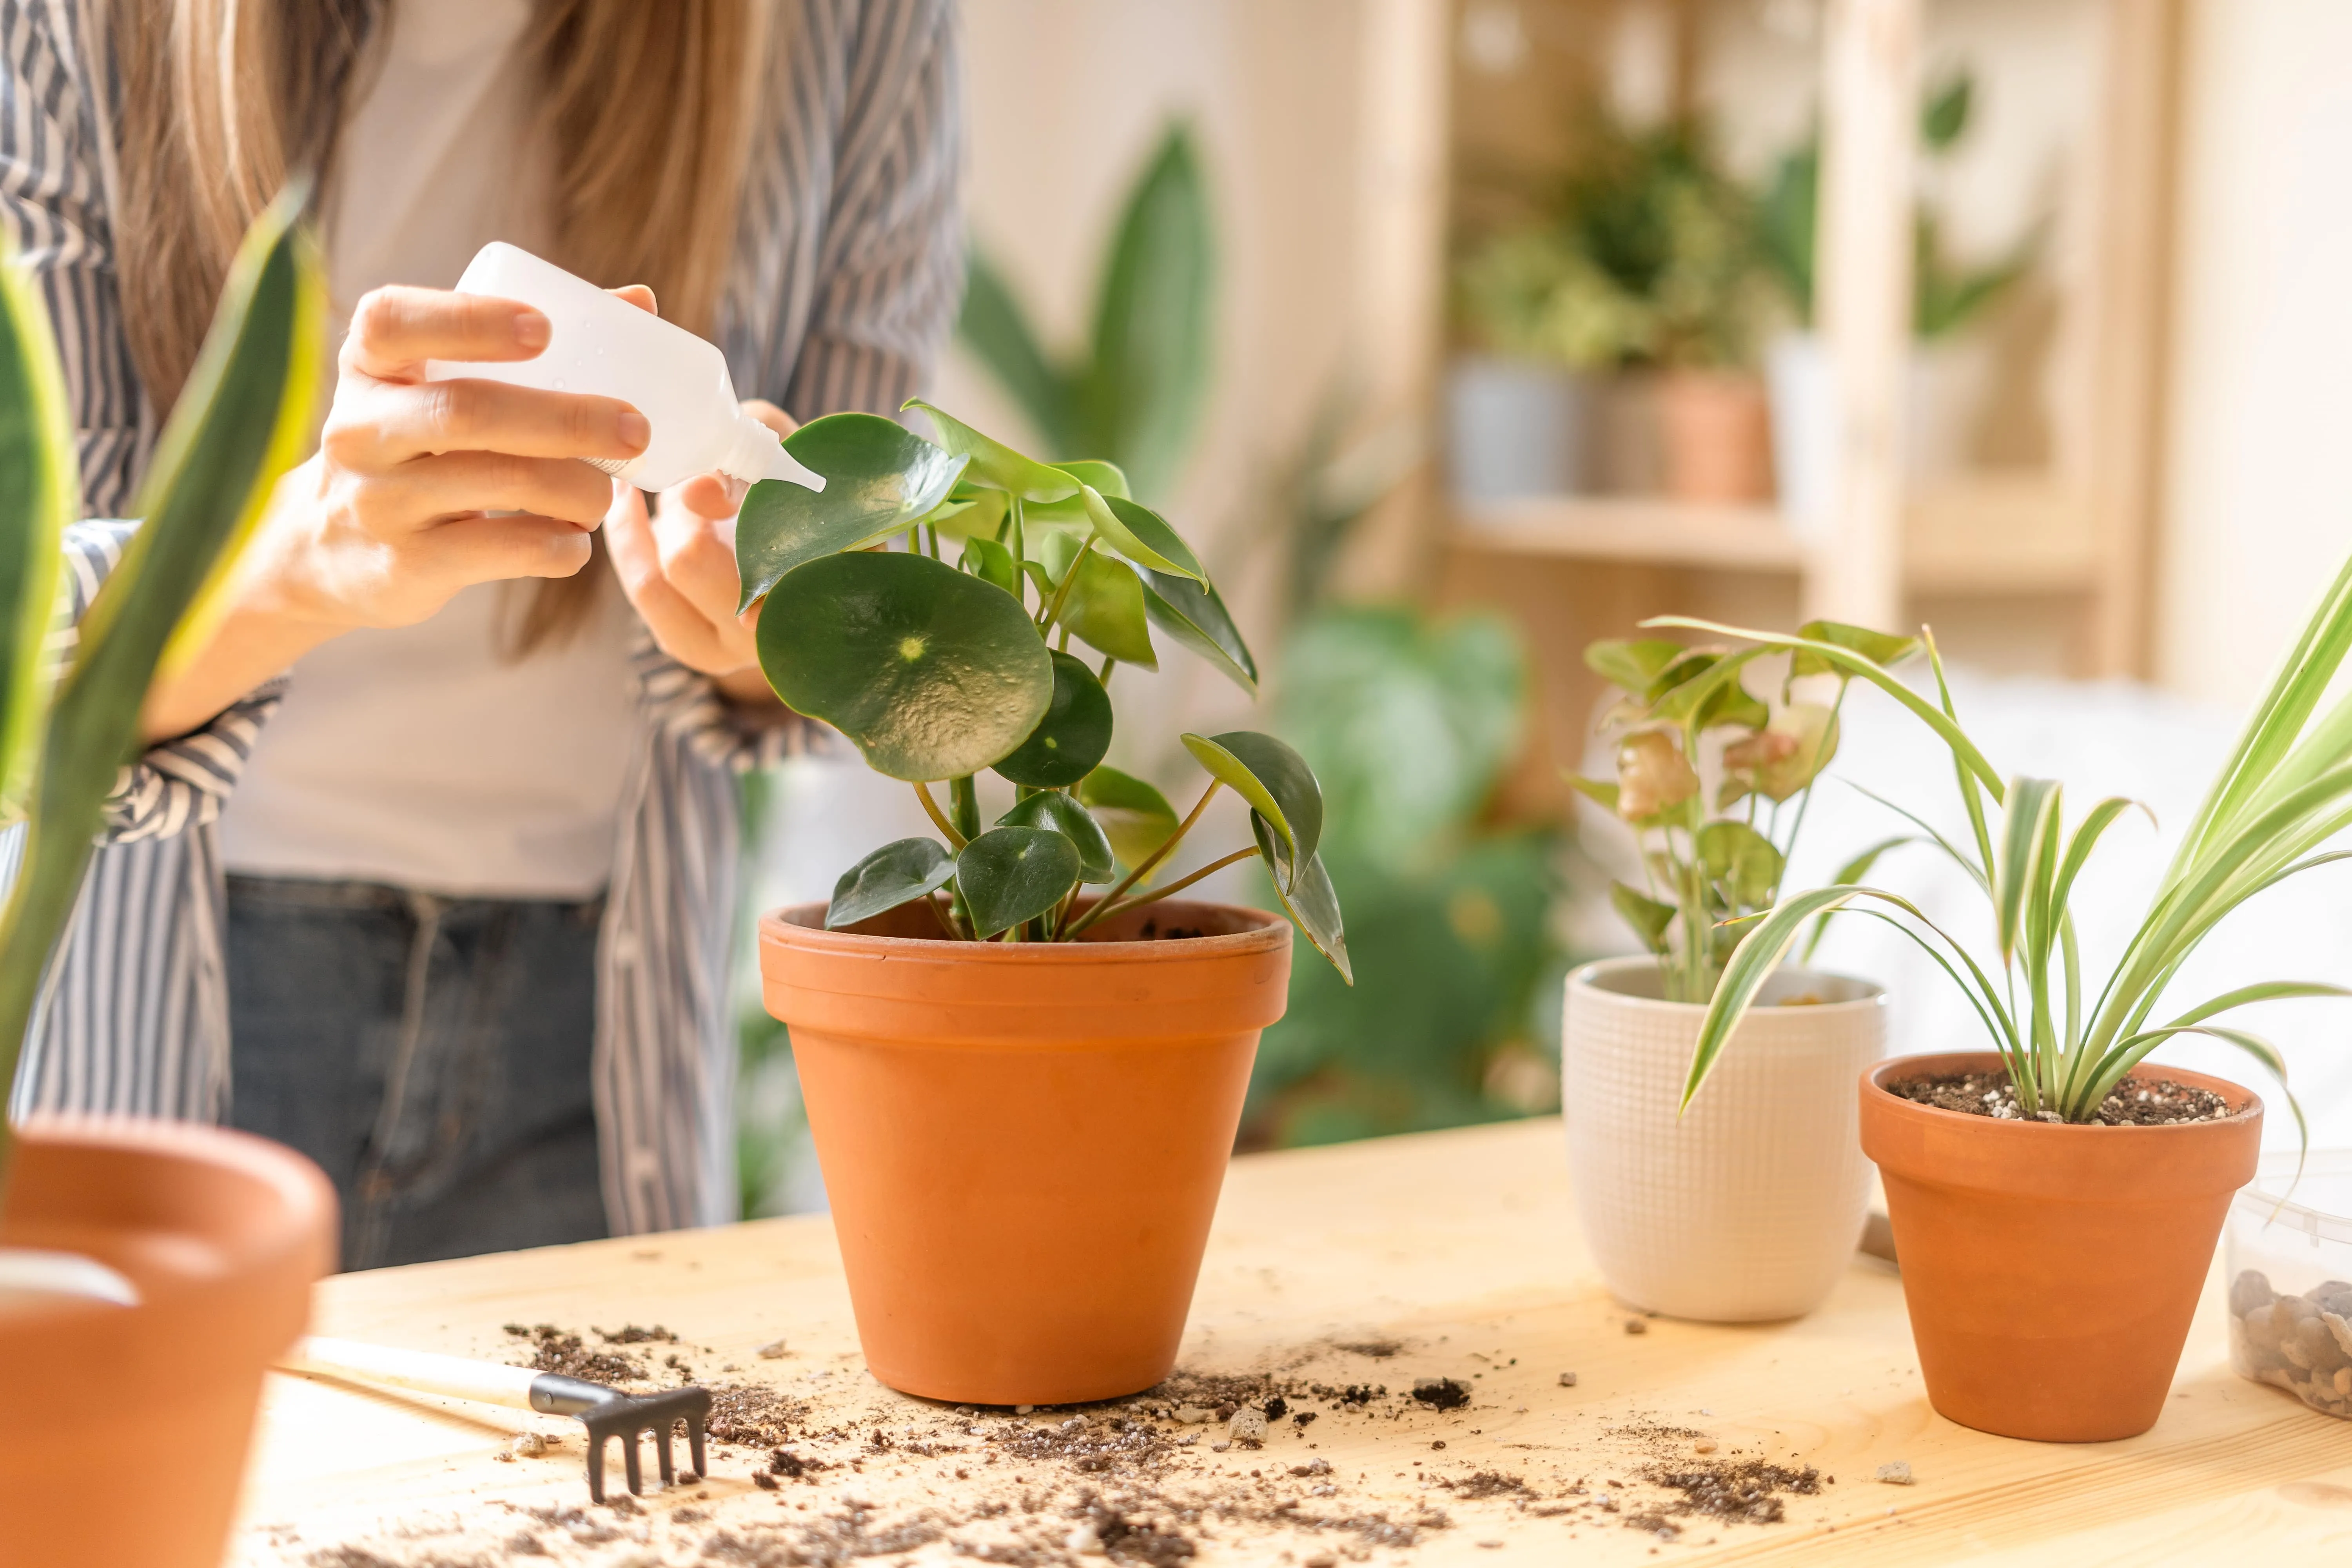 Is sugar water good for plants Experts have their say on this gardening hack